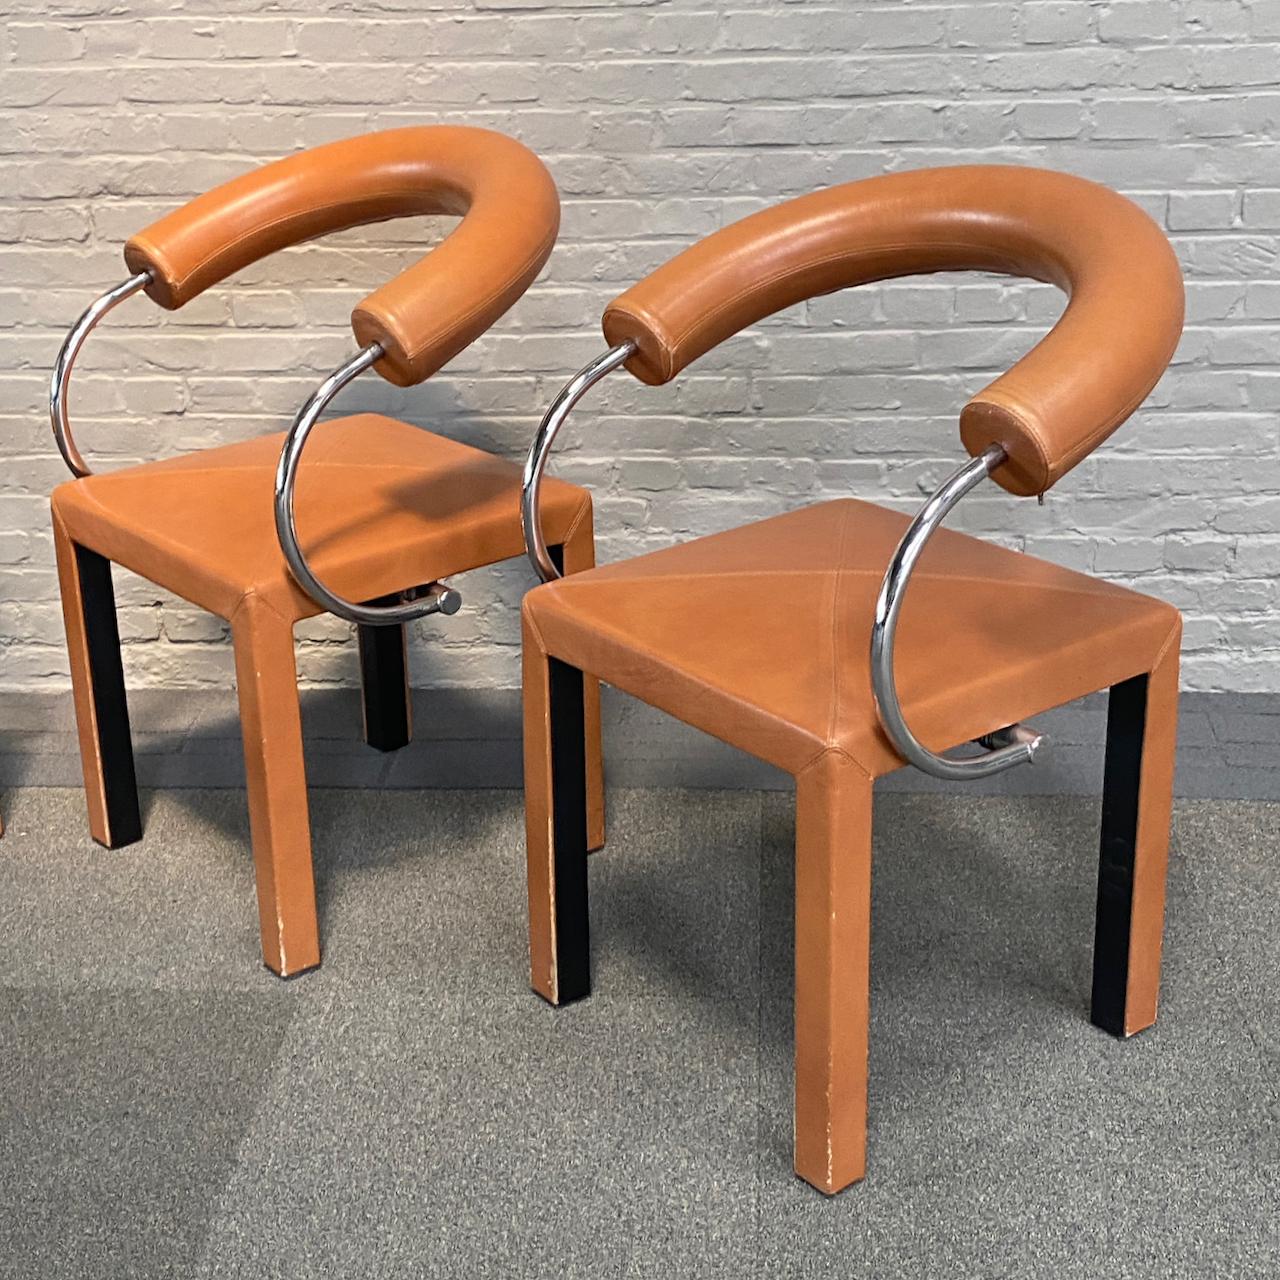 paolo piva chair